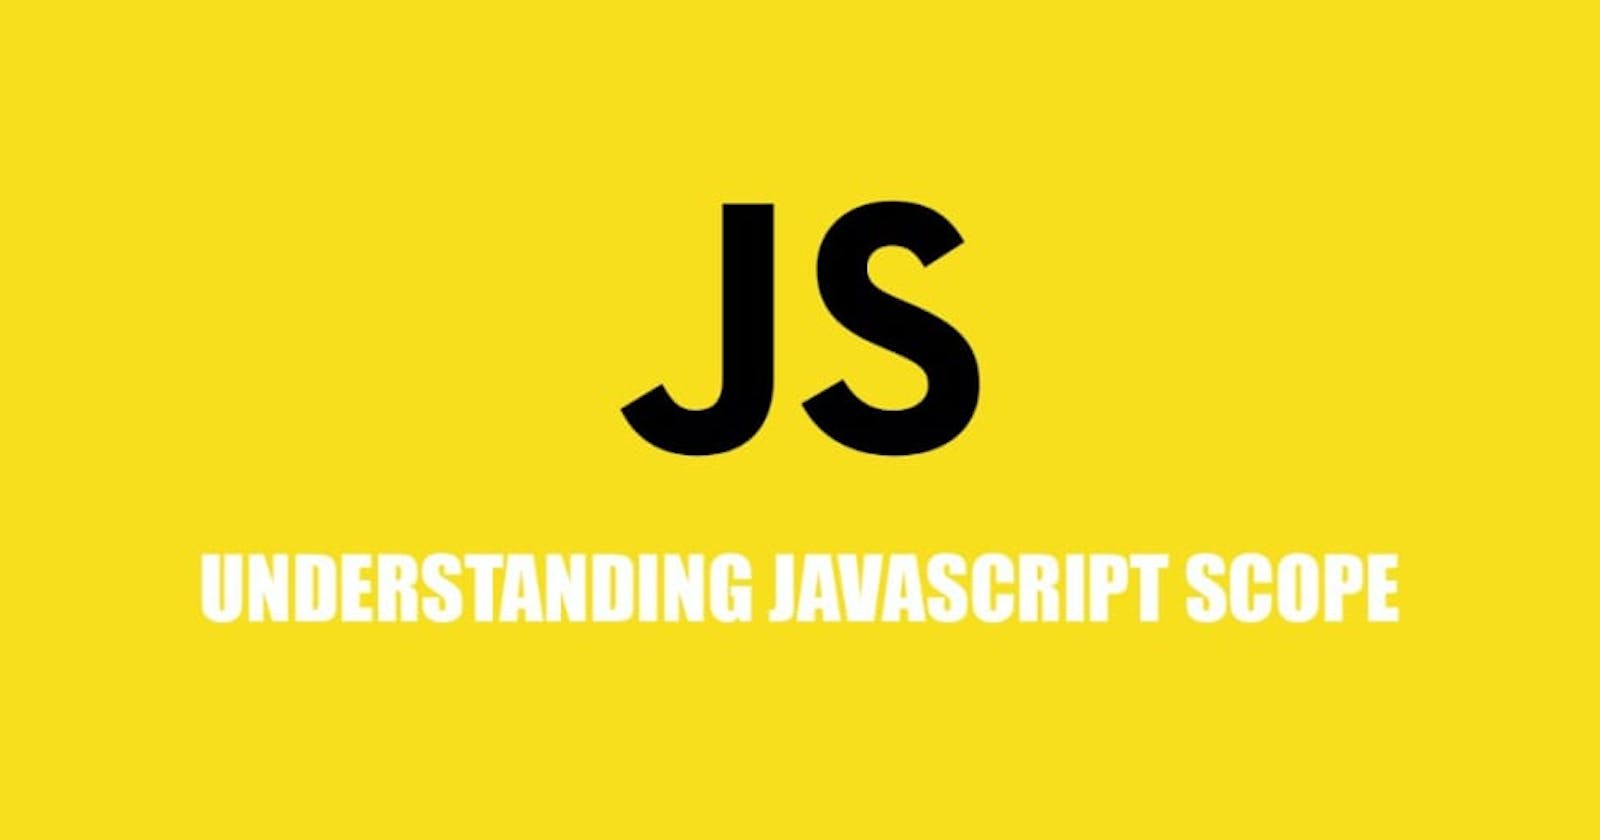 Javascript scope chain and the lexical environment